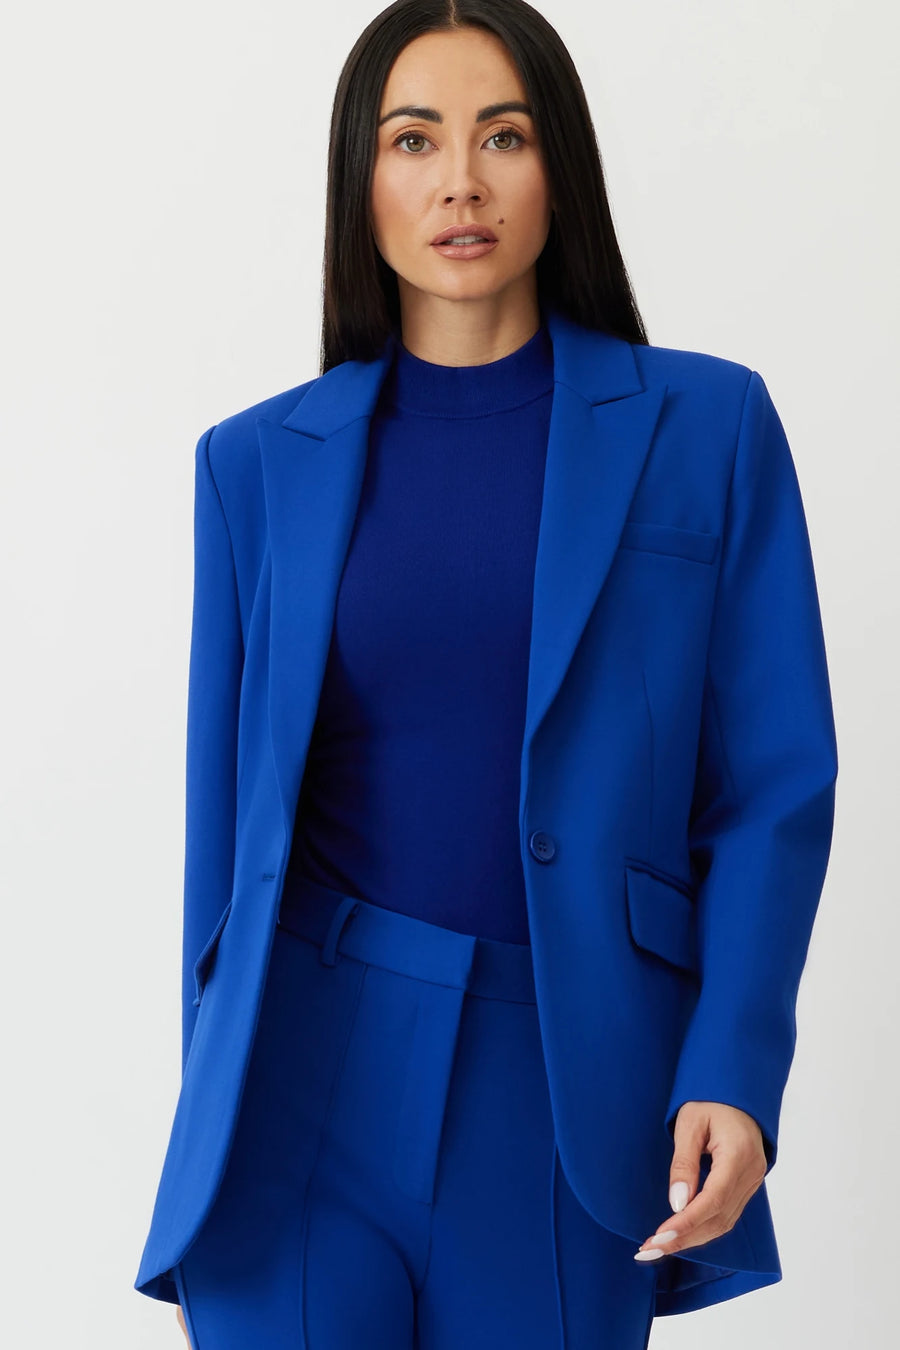 The Prescott single breasted ponte blazer in lapis blue by Greyven